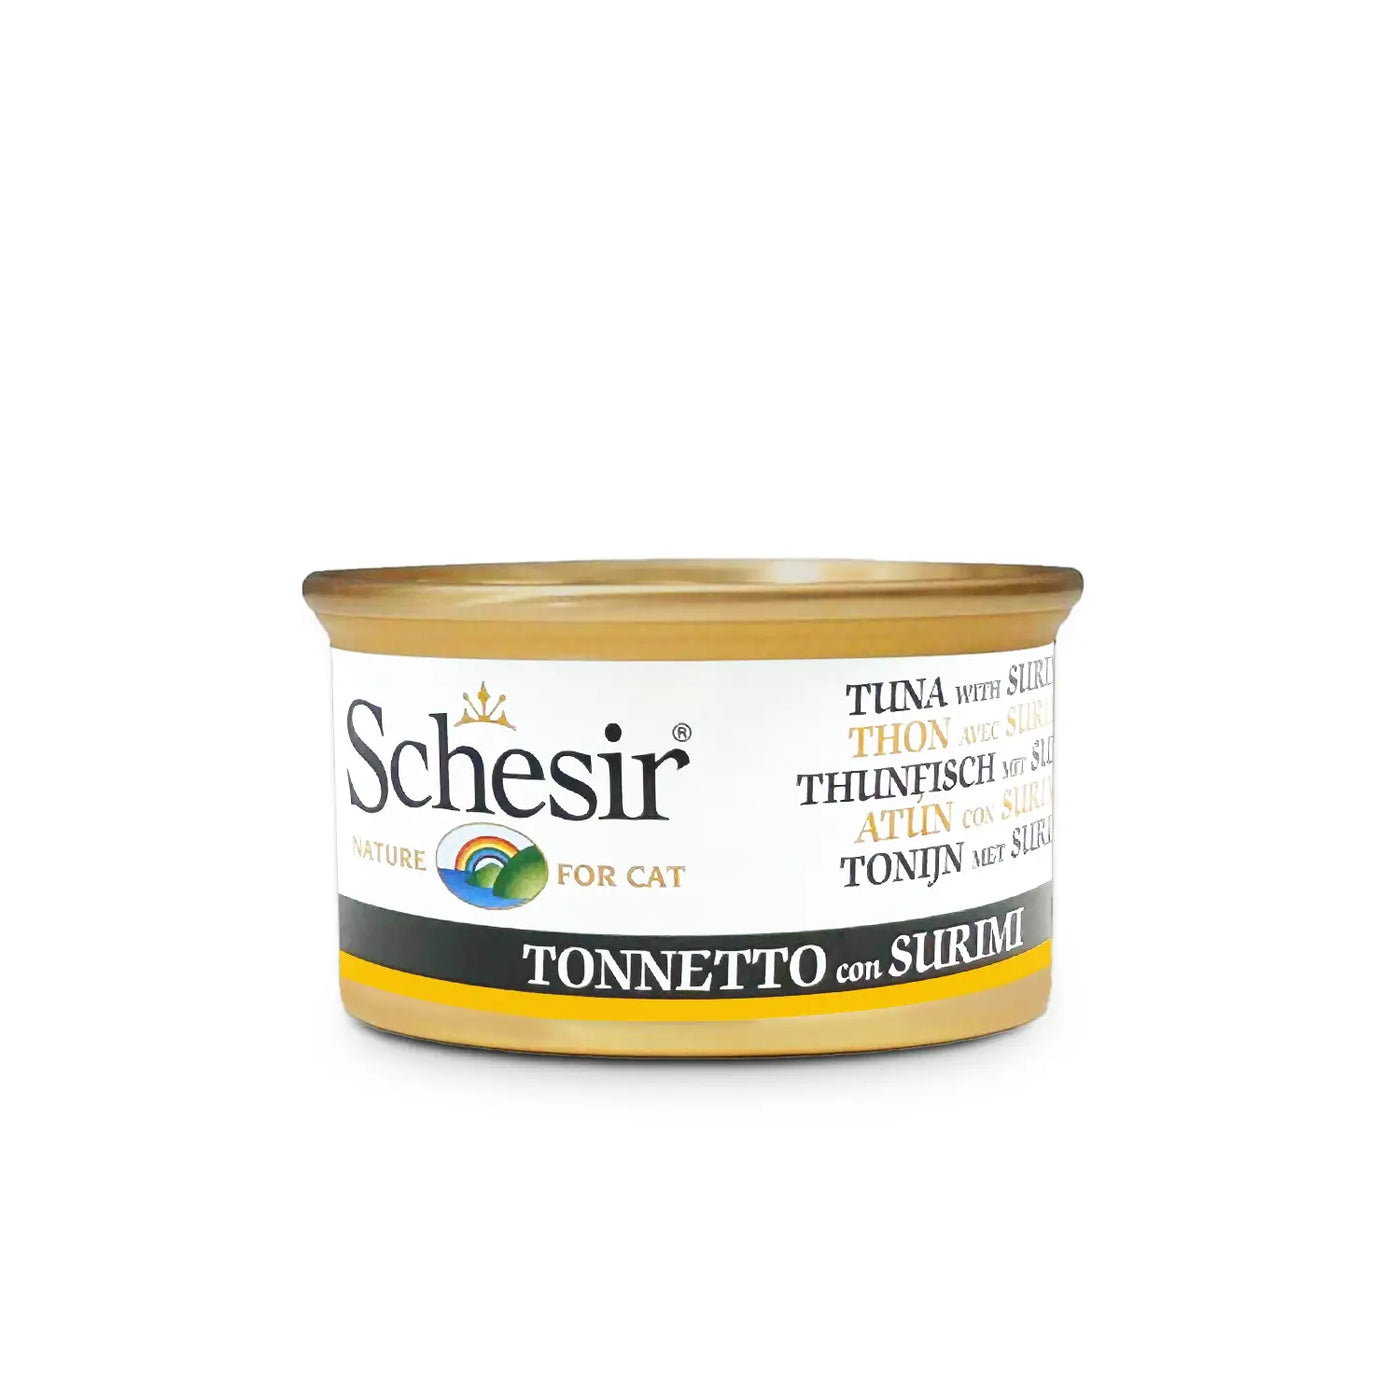 Schesir - Complementary Wet Food for Adult Cats - Tuna with Surimi 85g